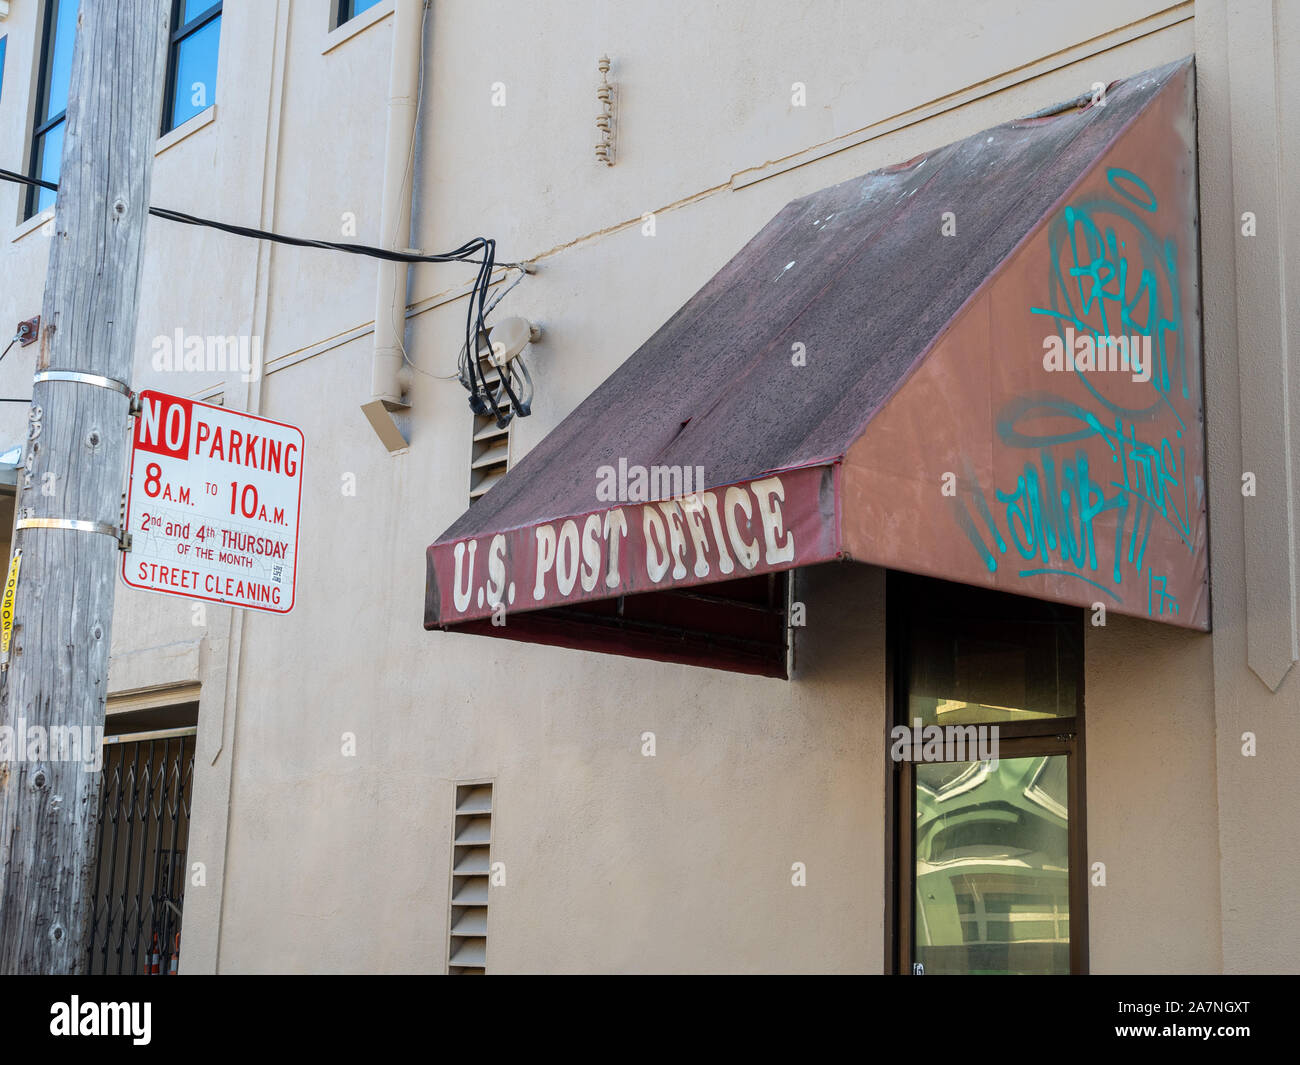 Beat up US post office awning covered in graffiti and some filth Stock Photo